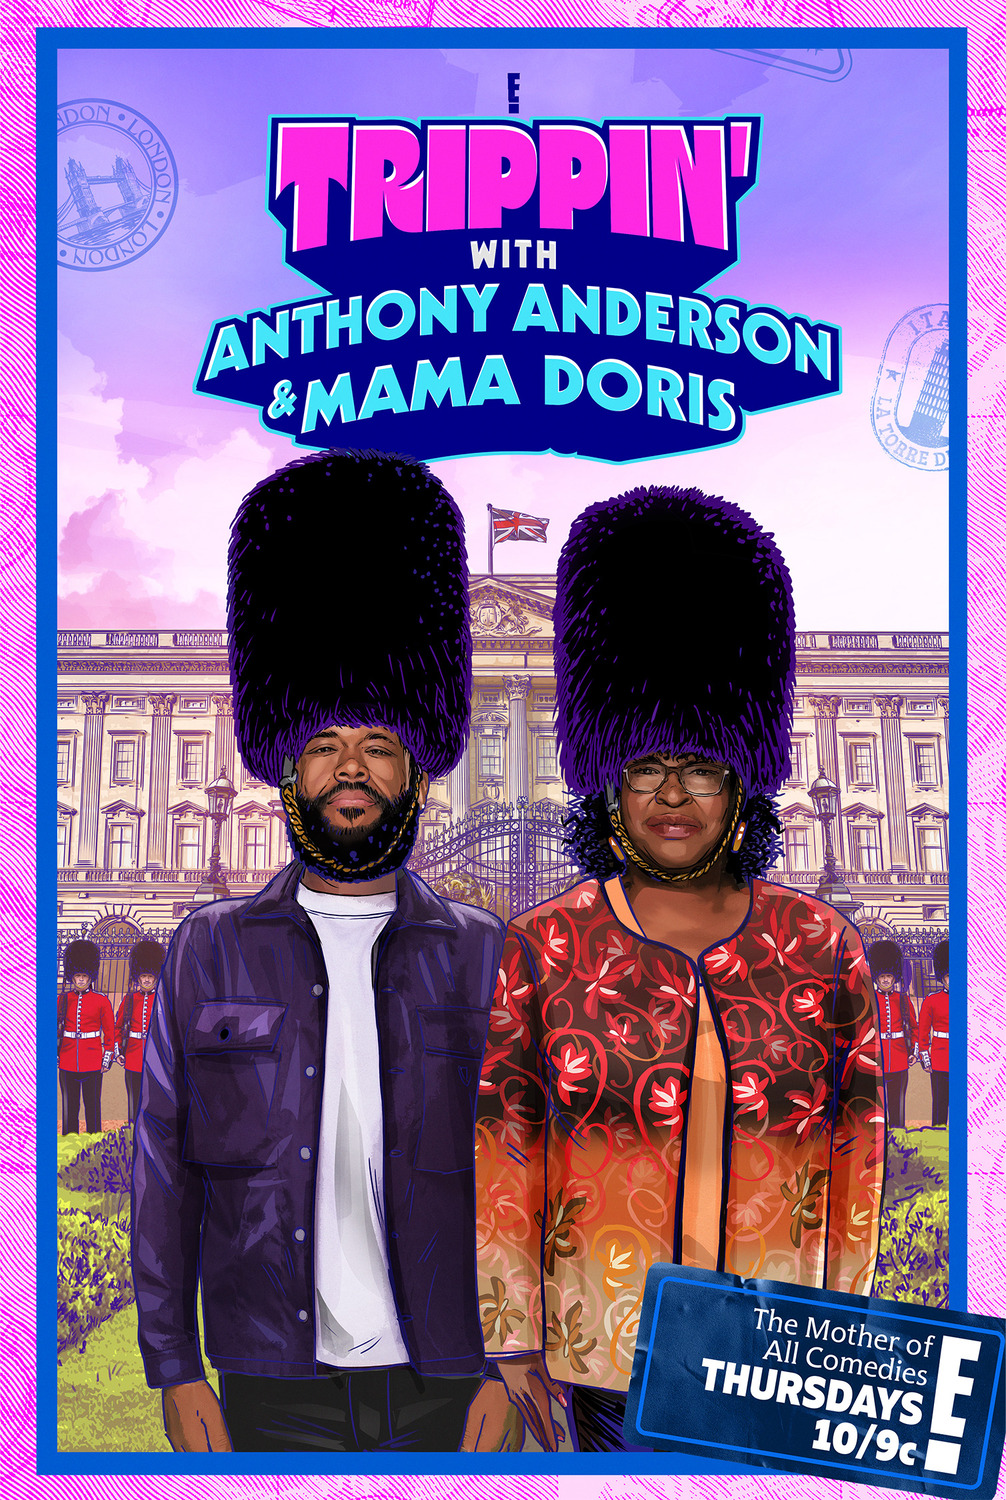 Extra Large TV Poster Image for Trippin' with Anthony Anderson and Mama Doris (#5 of 5)